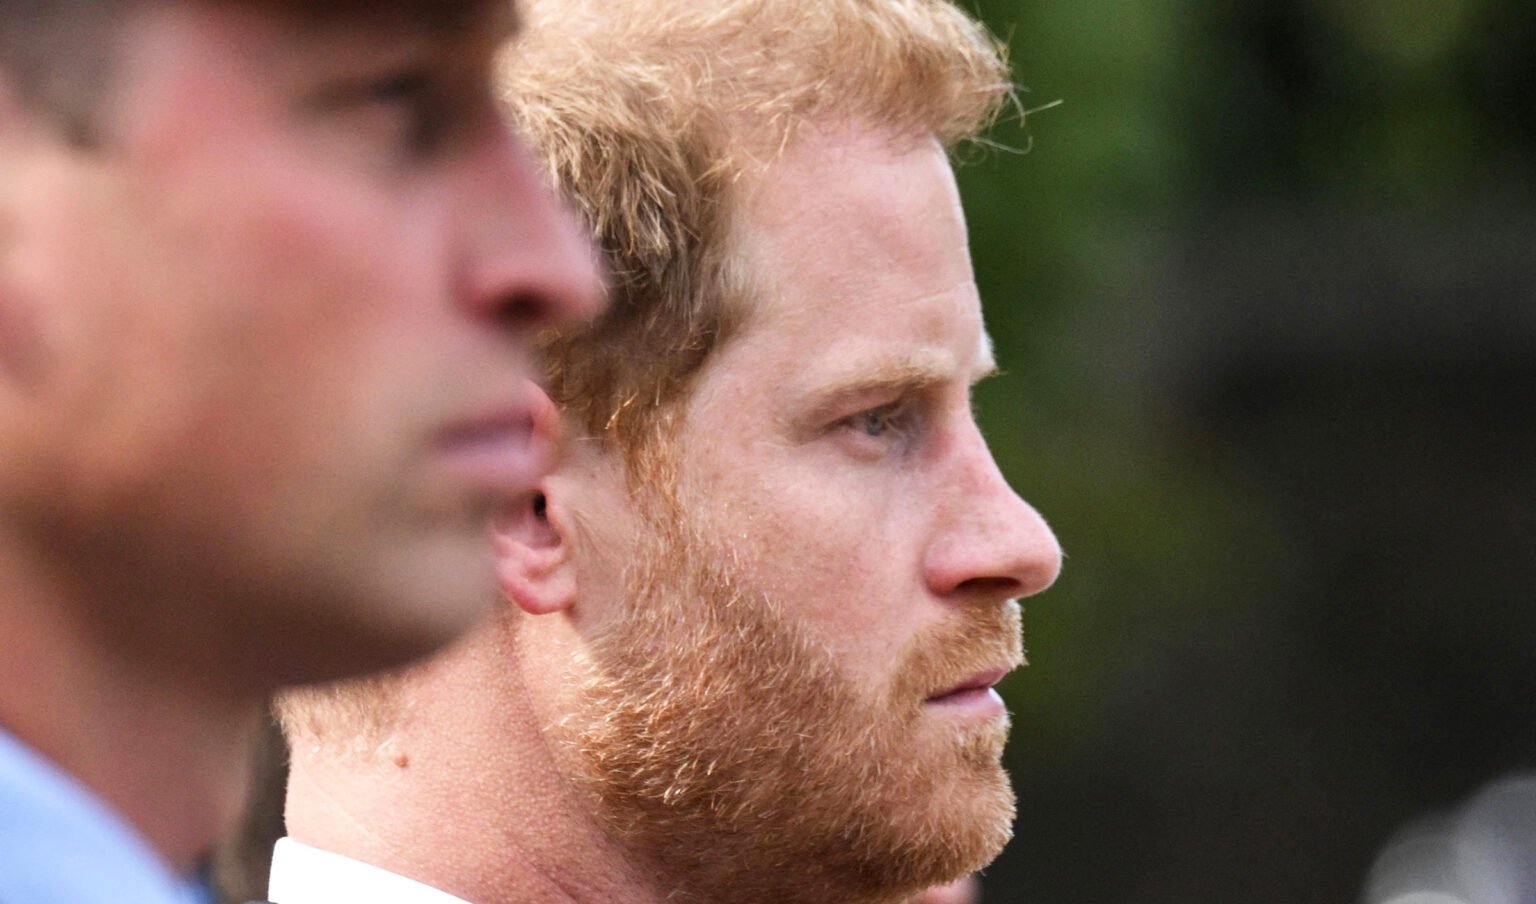 Explore the buzz behind Prince Harry's rumored divorce. Is there truth in the whispers, or just more royal rumbles? Grab your sleuthing hat and dissect the drama with us.